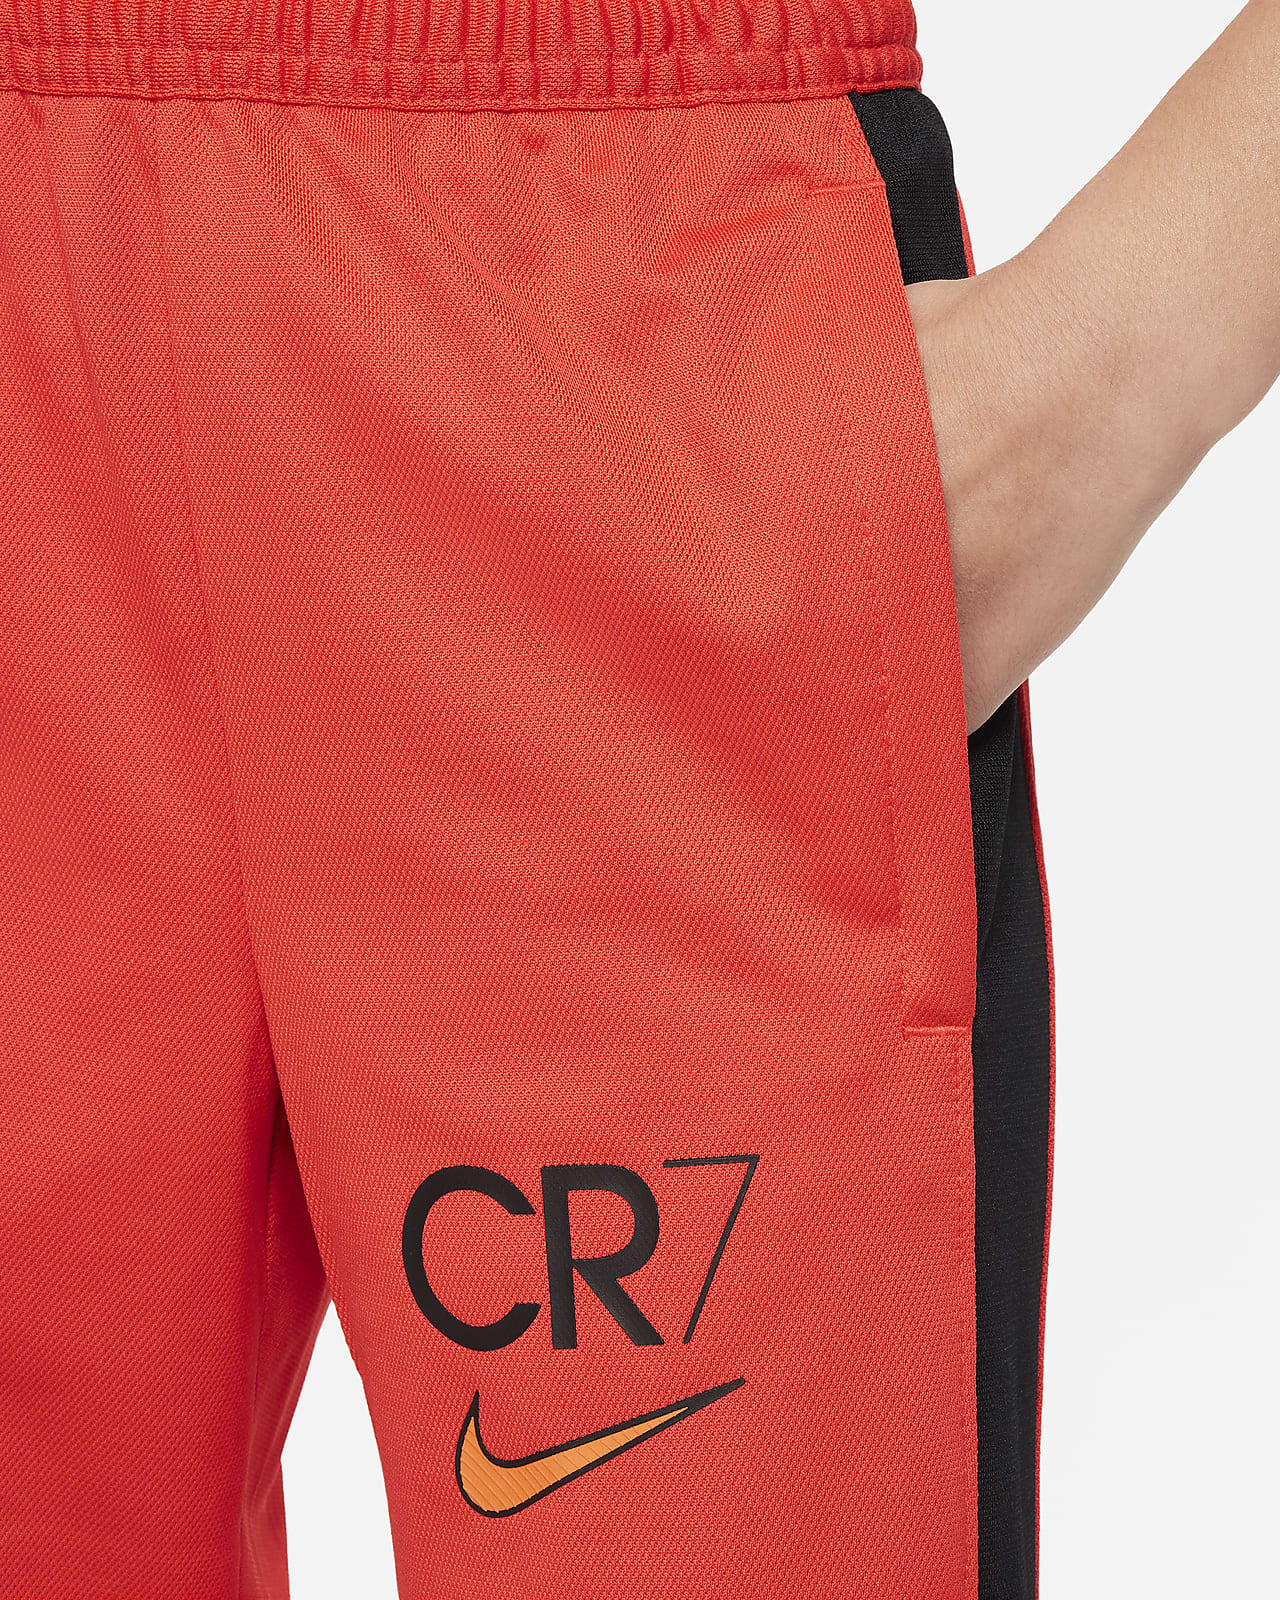  CR7 Pants 3 Pairs : Clothing, Shoes & Jewelry